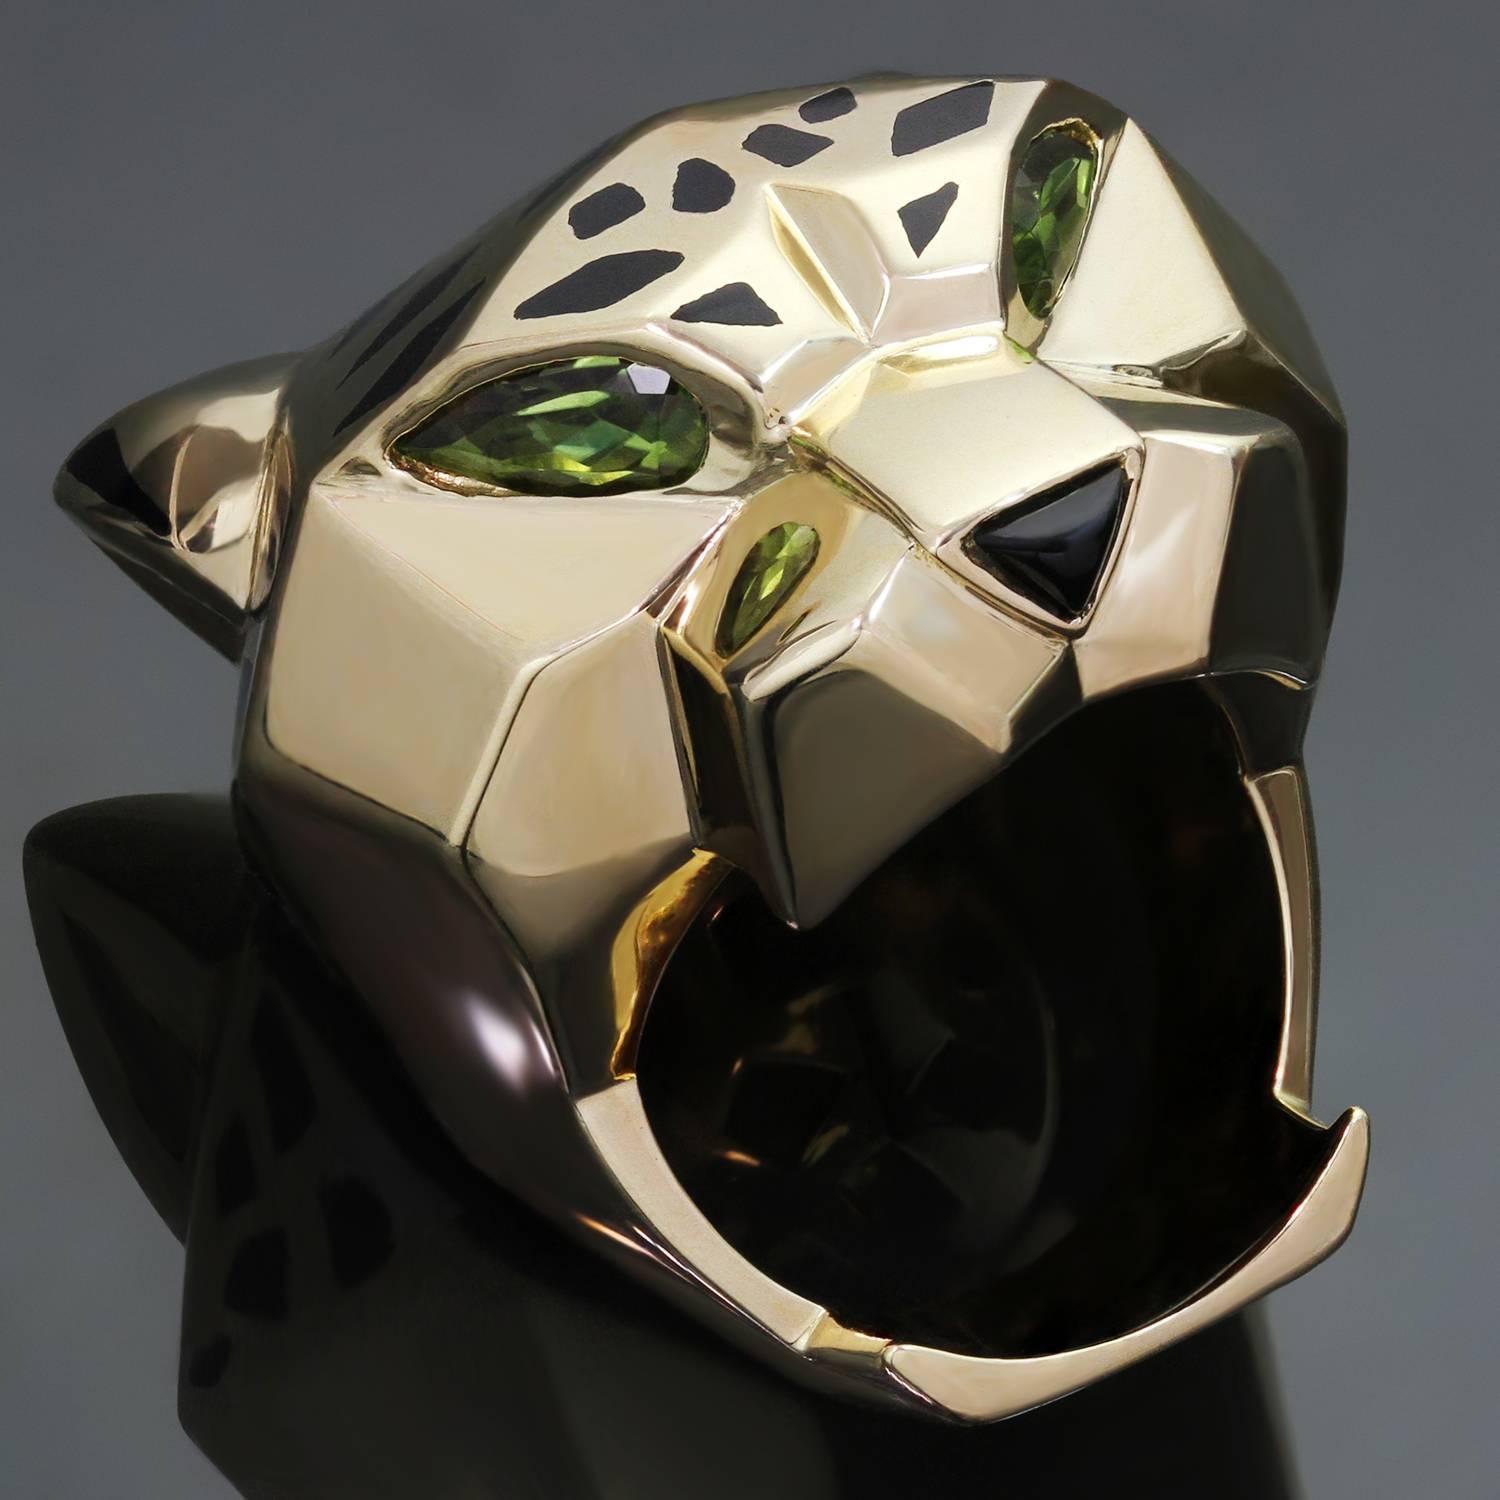 This gorgeous Panthère de Cartier ring features a chic and fierce panther design crafted in 18k yellow gold with black lacquer spots, faceted peridot eyes and a black onyx nose. Made in France circa 2010s. Measurements: 1.22